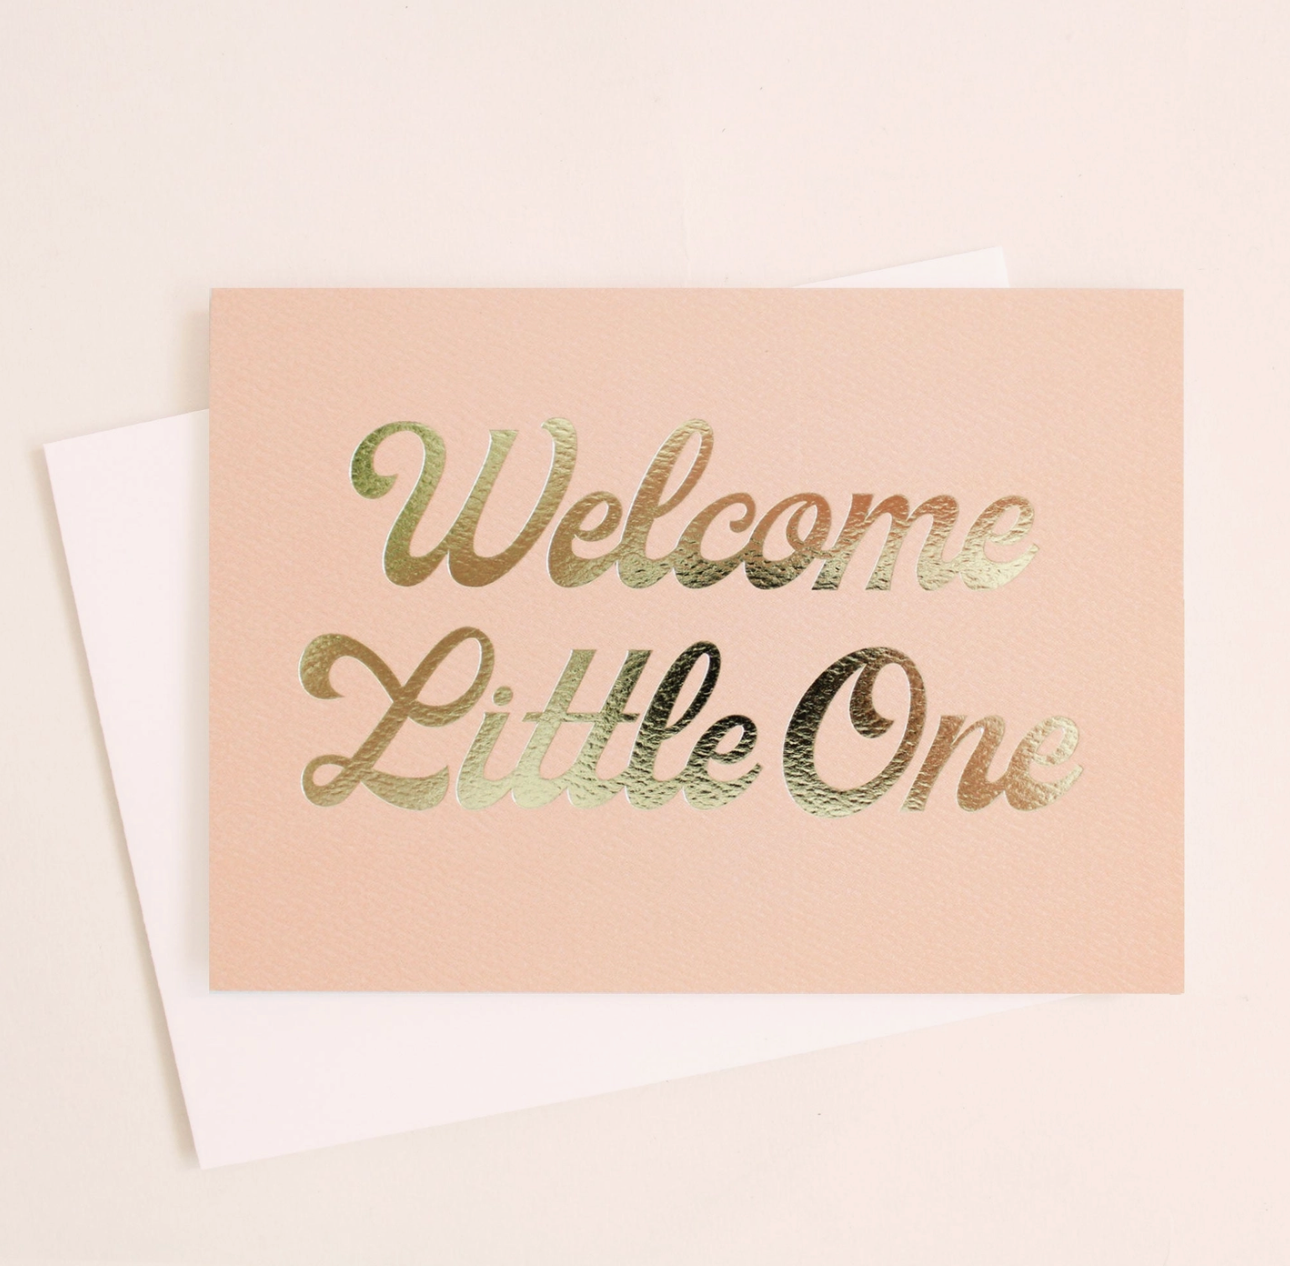 Welcome Little One Card